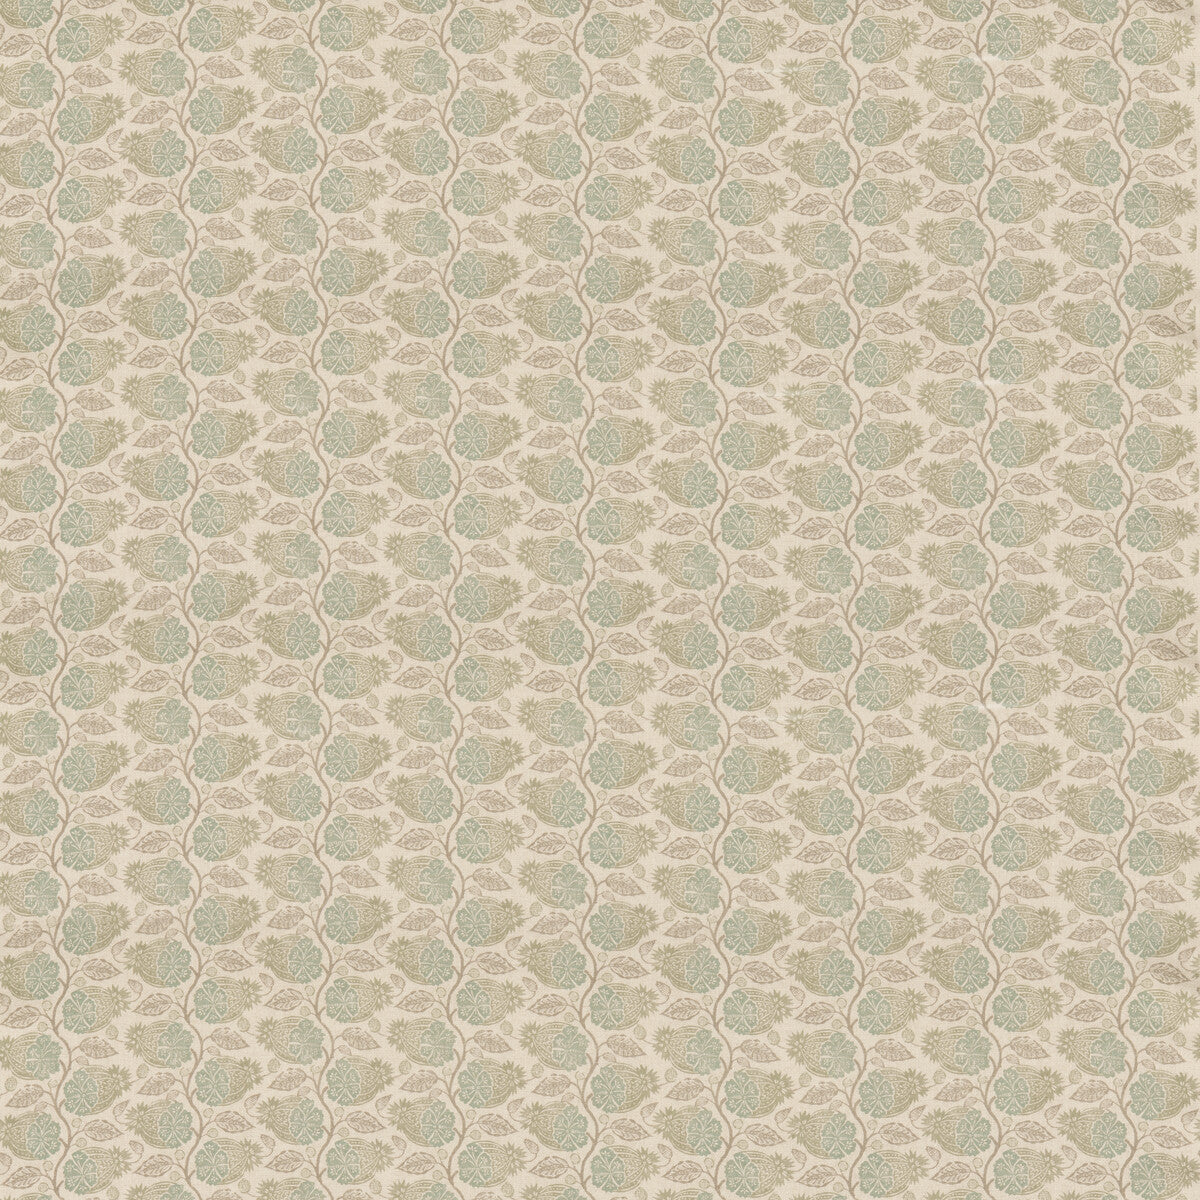 Calcot fabric in aqua color - pattern BP11000.4.0 - by G P &amp; J Baker in the House Small Prints collection